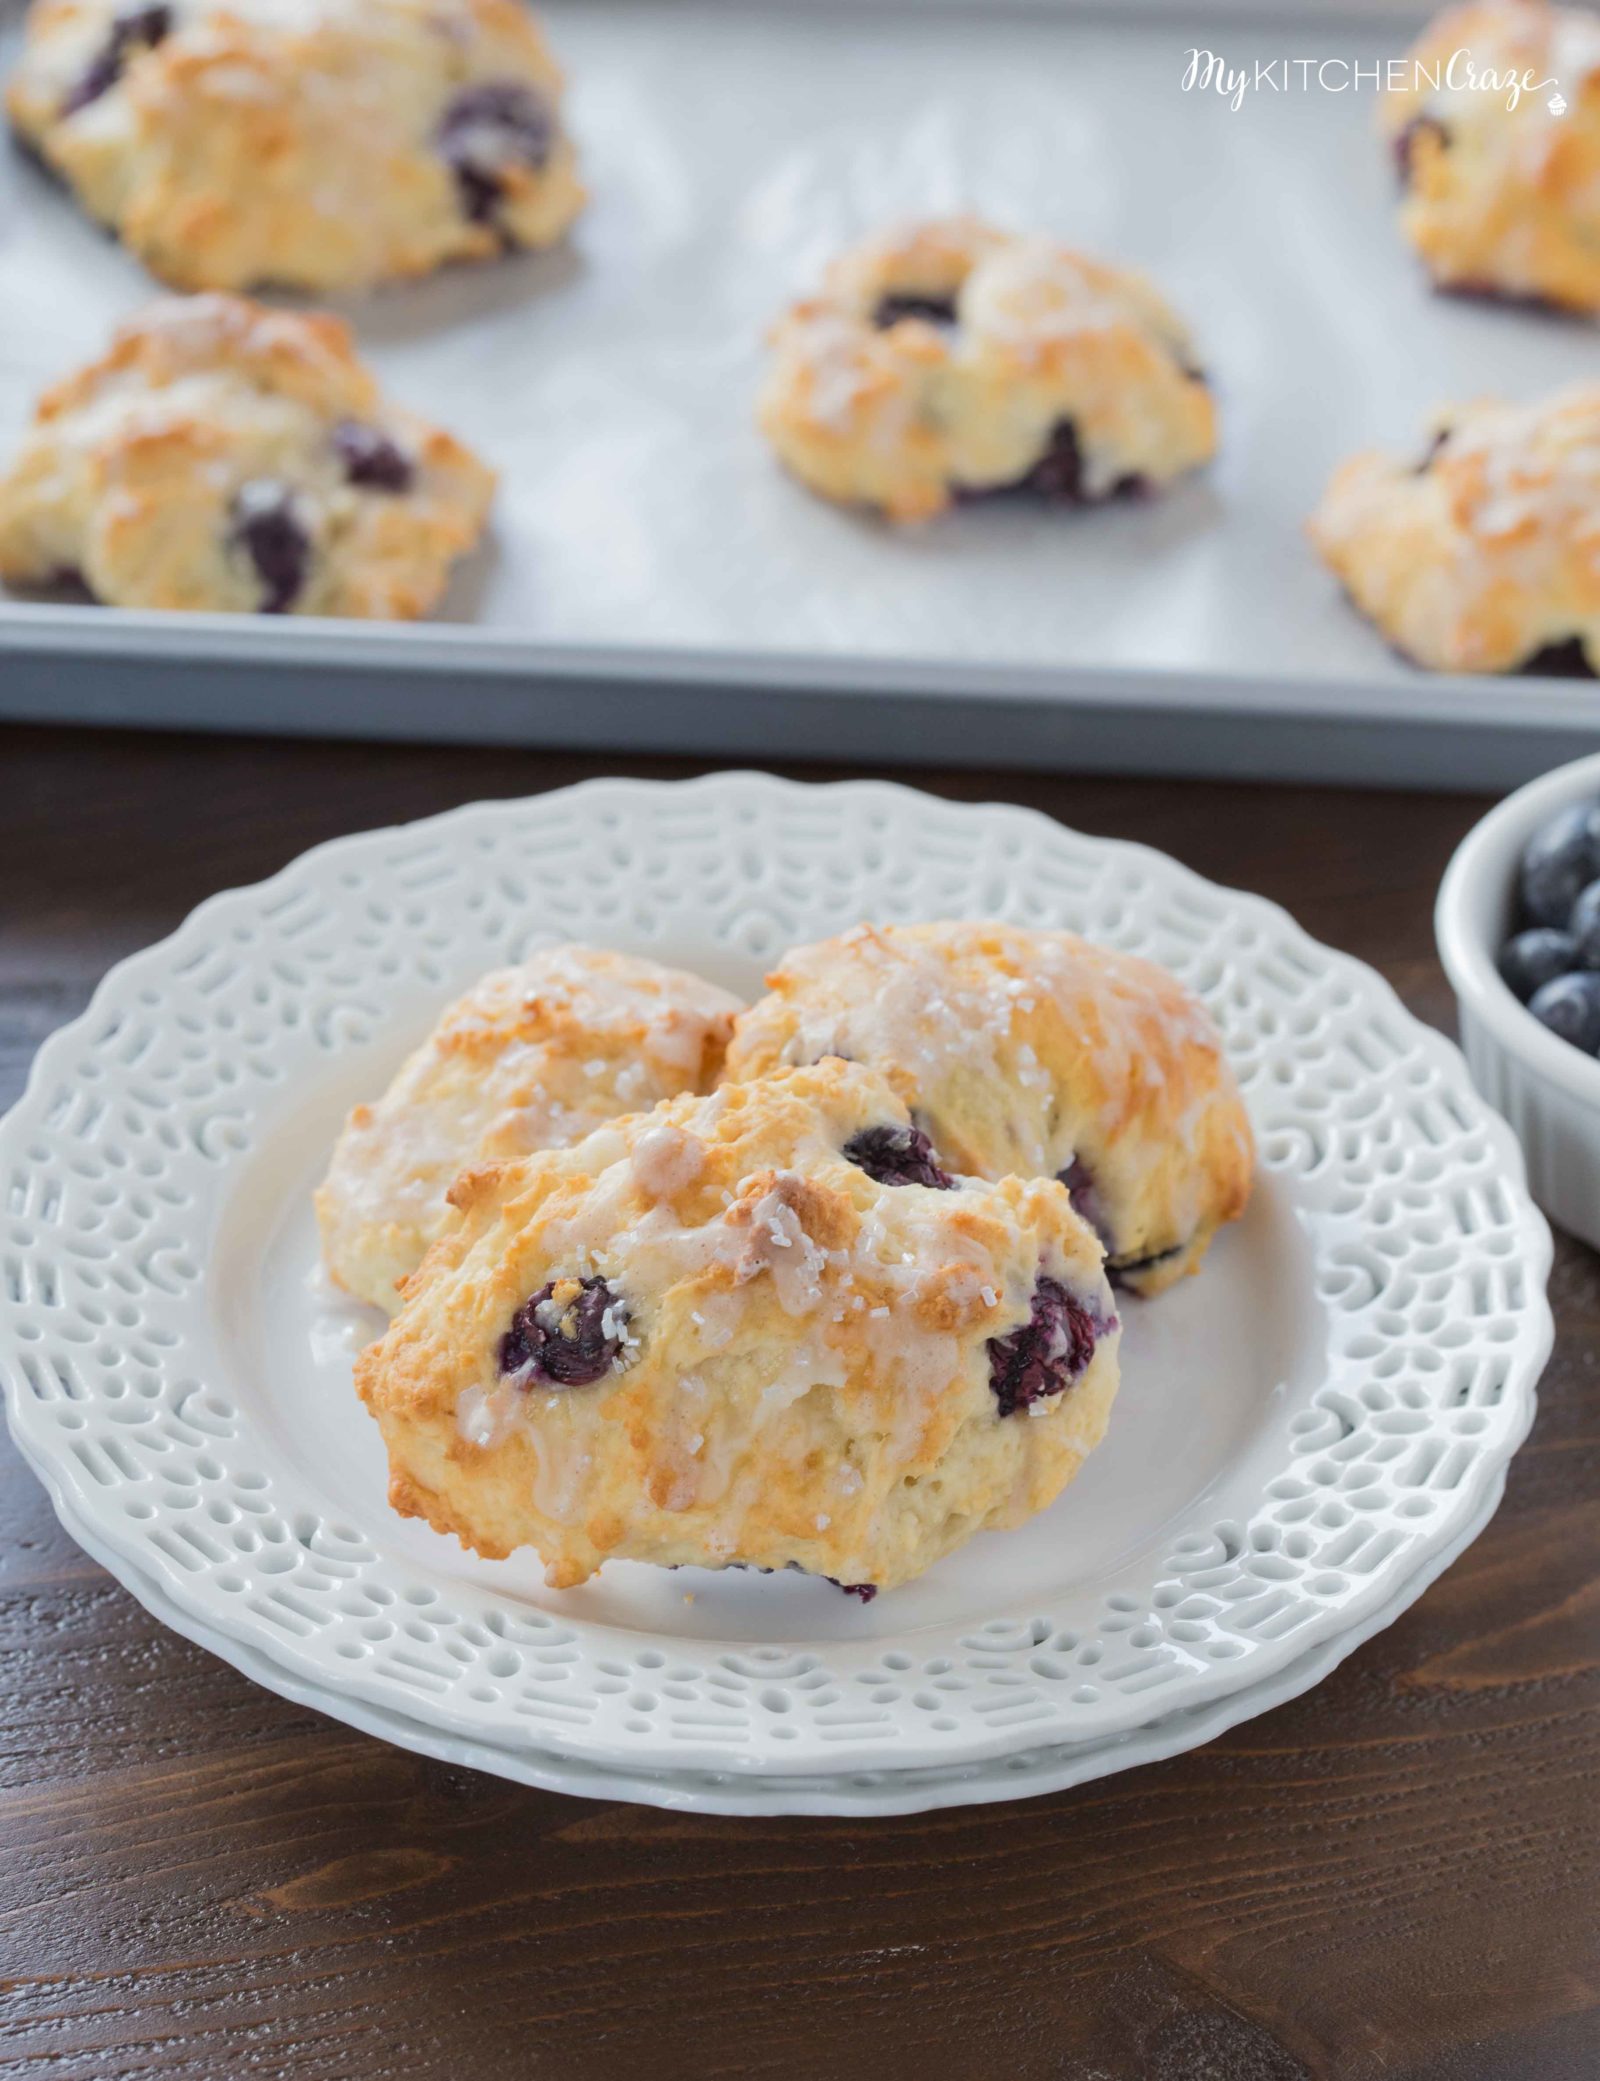 Blueberry Scuffins ~ mykitchencraze .com ~ They're not scones or muffins, but Scuffins. Enjoy these moist and delicious Blueberry Scuffins with a cup of coffee and/or tea.